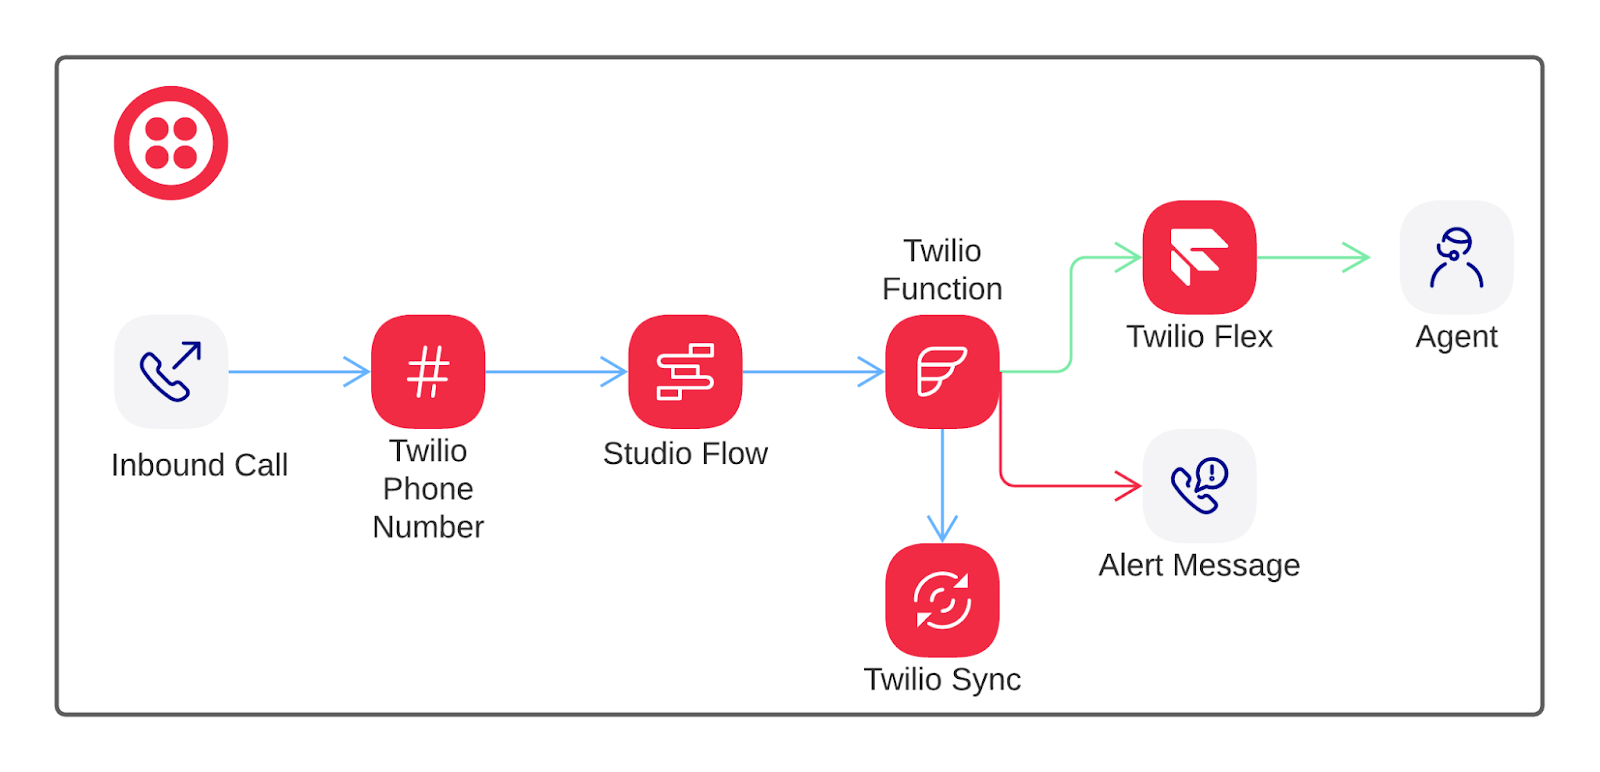 Flow from an inbound call to a number, a Studio Flow, a Function, a Sync, routing to an alert message or Flex agentund call flow